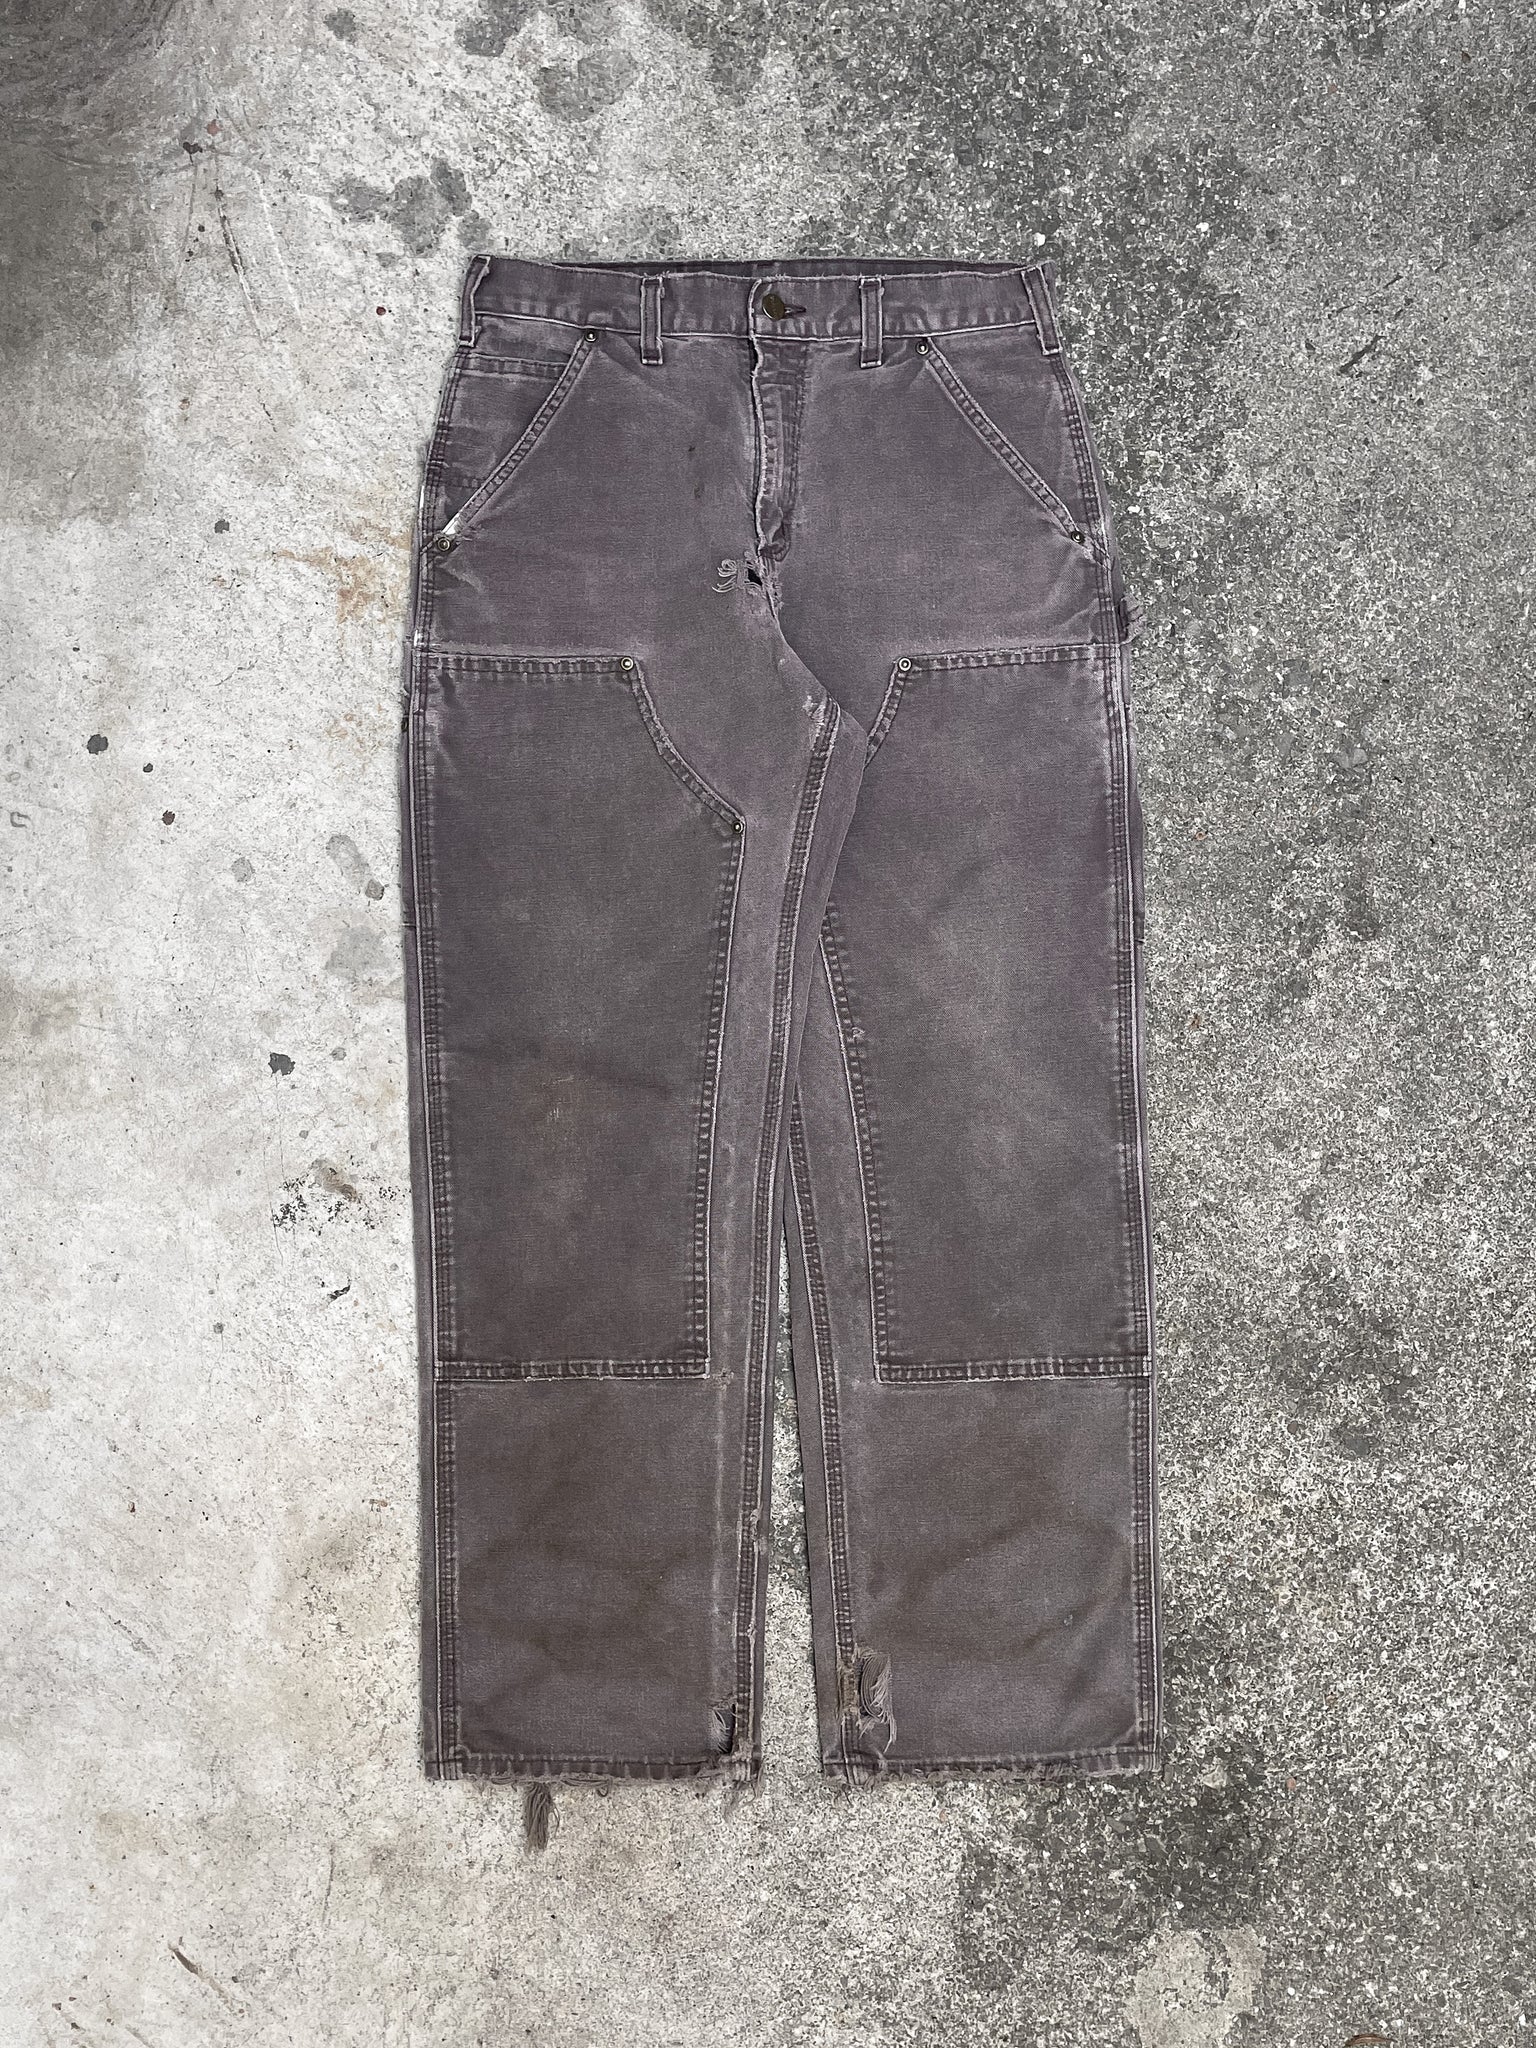 Carhartt Double Front Knee Pants Faded Brown Destroyed Distressed Workwear  33x30